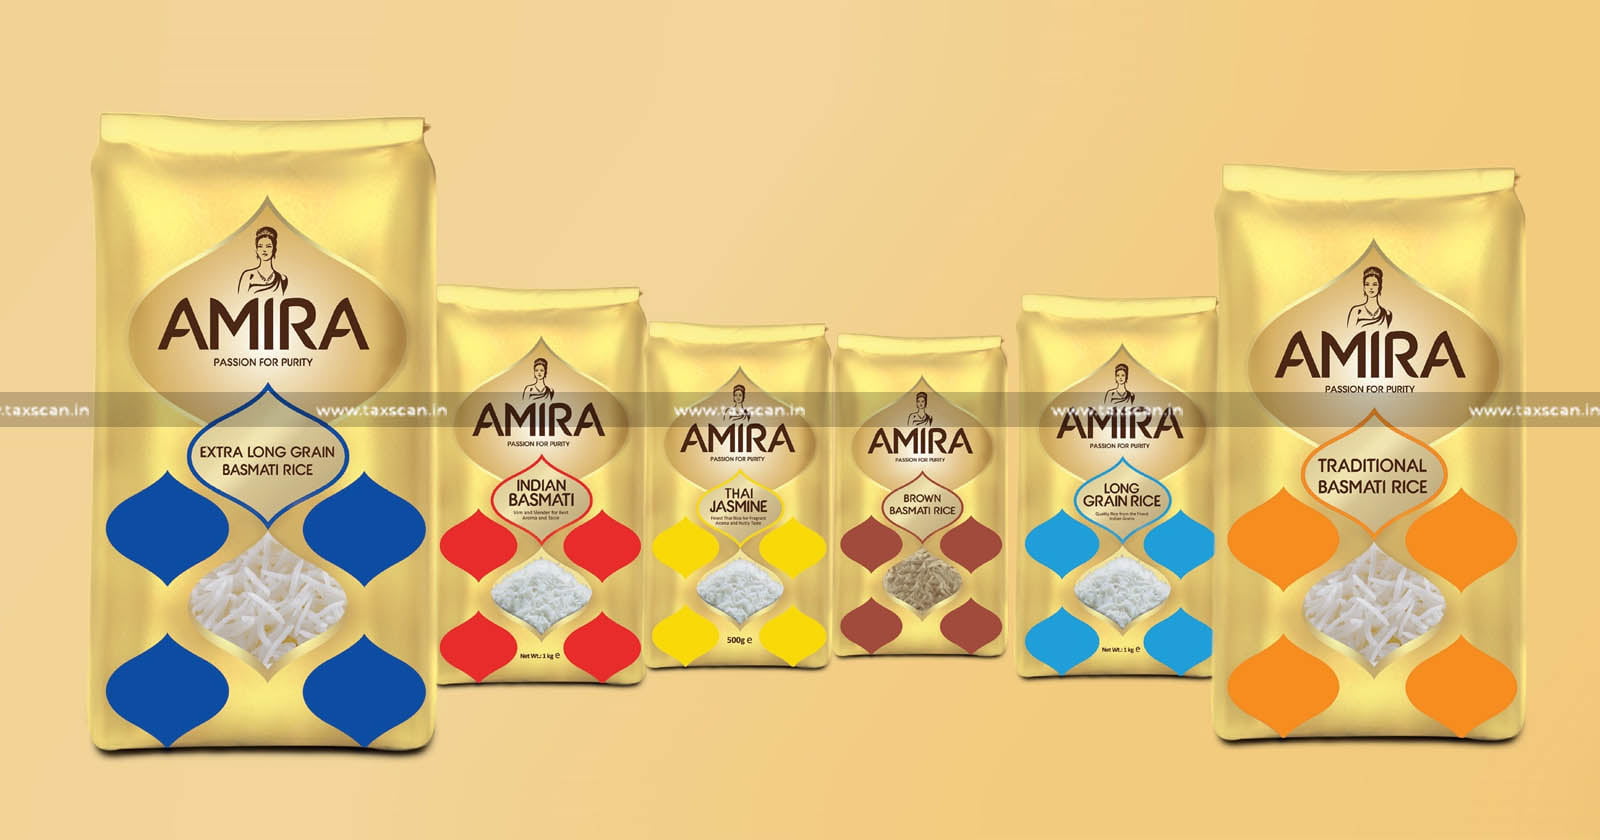 Bank Fraud of Rs. 1201 Crores - ED Attaches Properties of Amira Pure Foods During Investigation - ED Attaches Properties - Bank Fraud - ED - Investigation - Taxscan